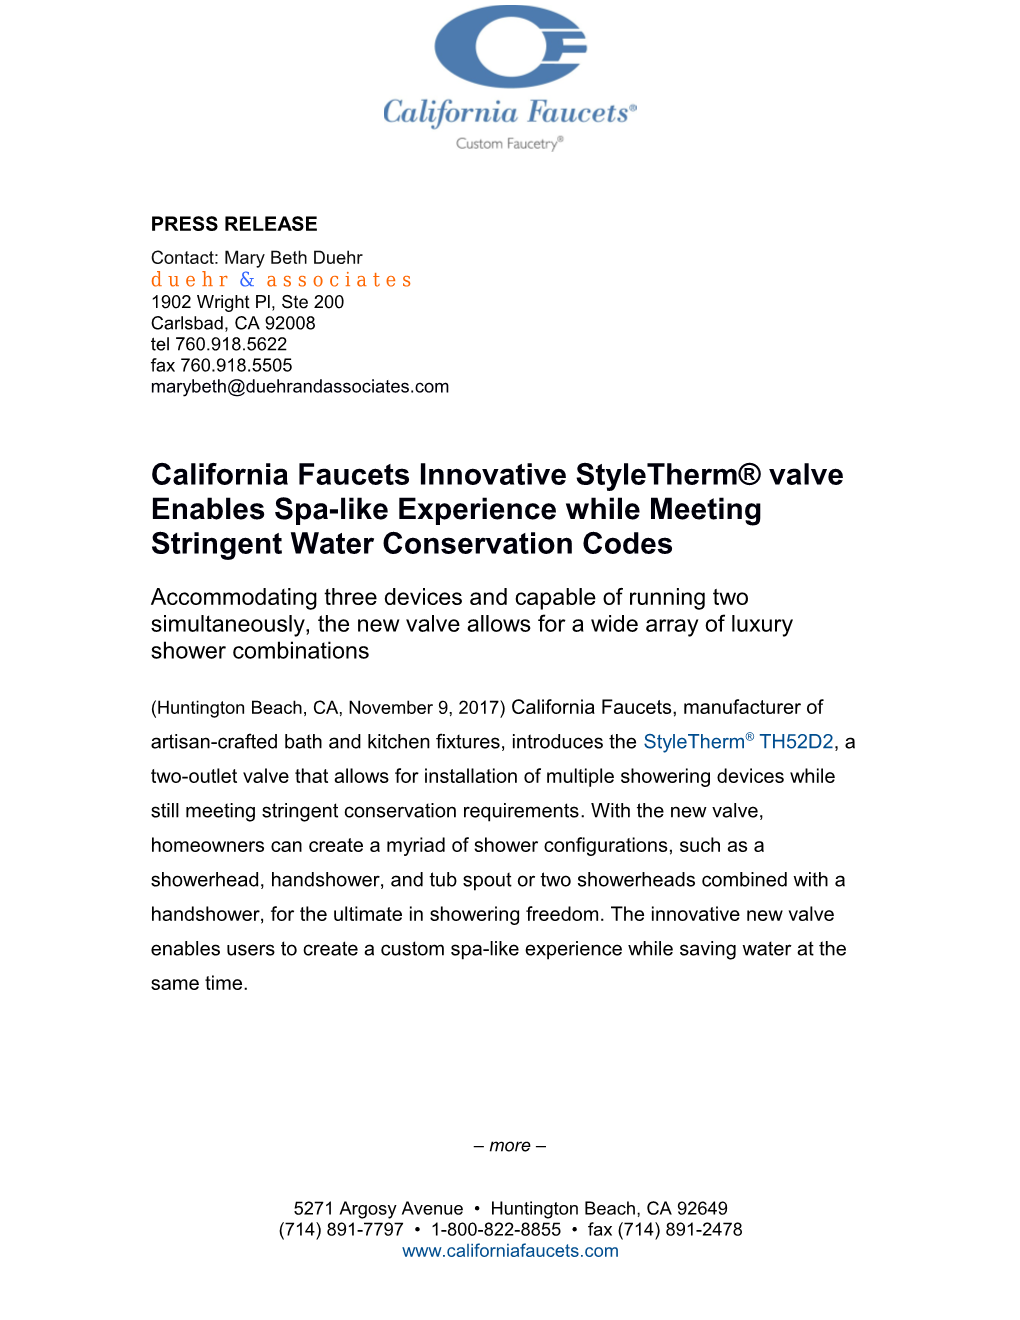 California Faucets Press Release (Continued)